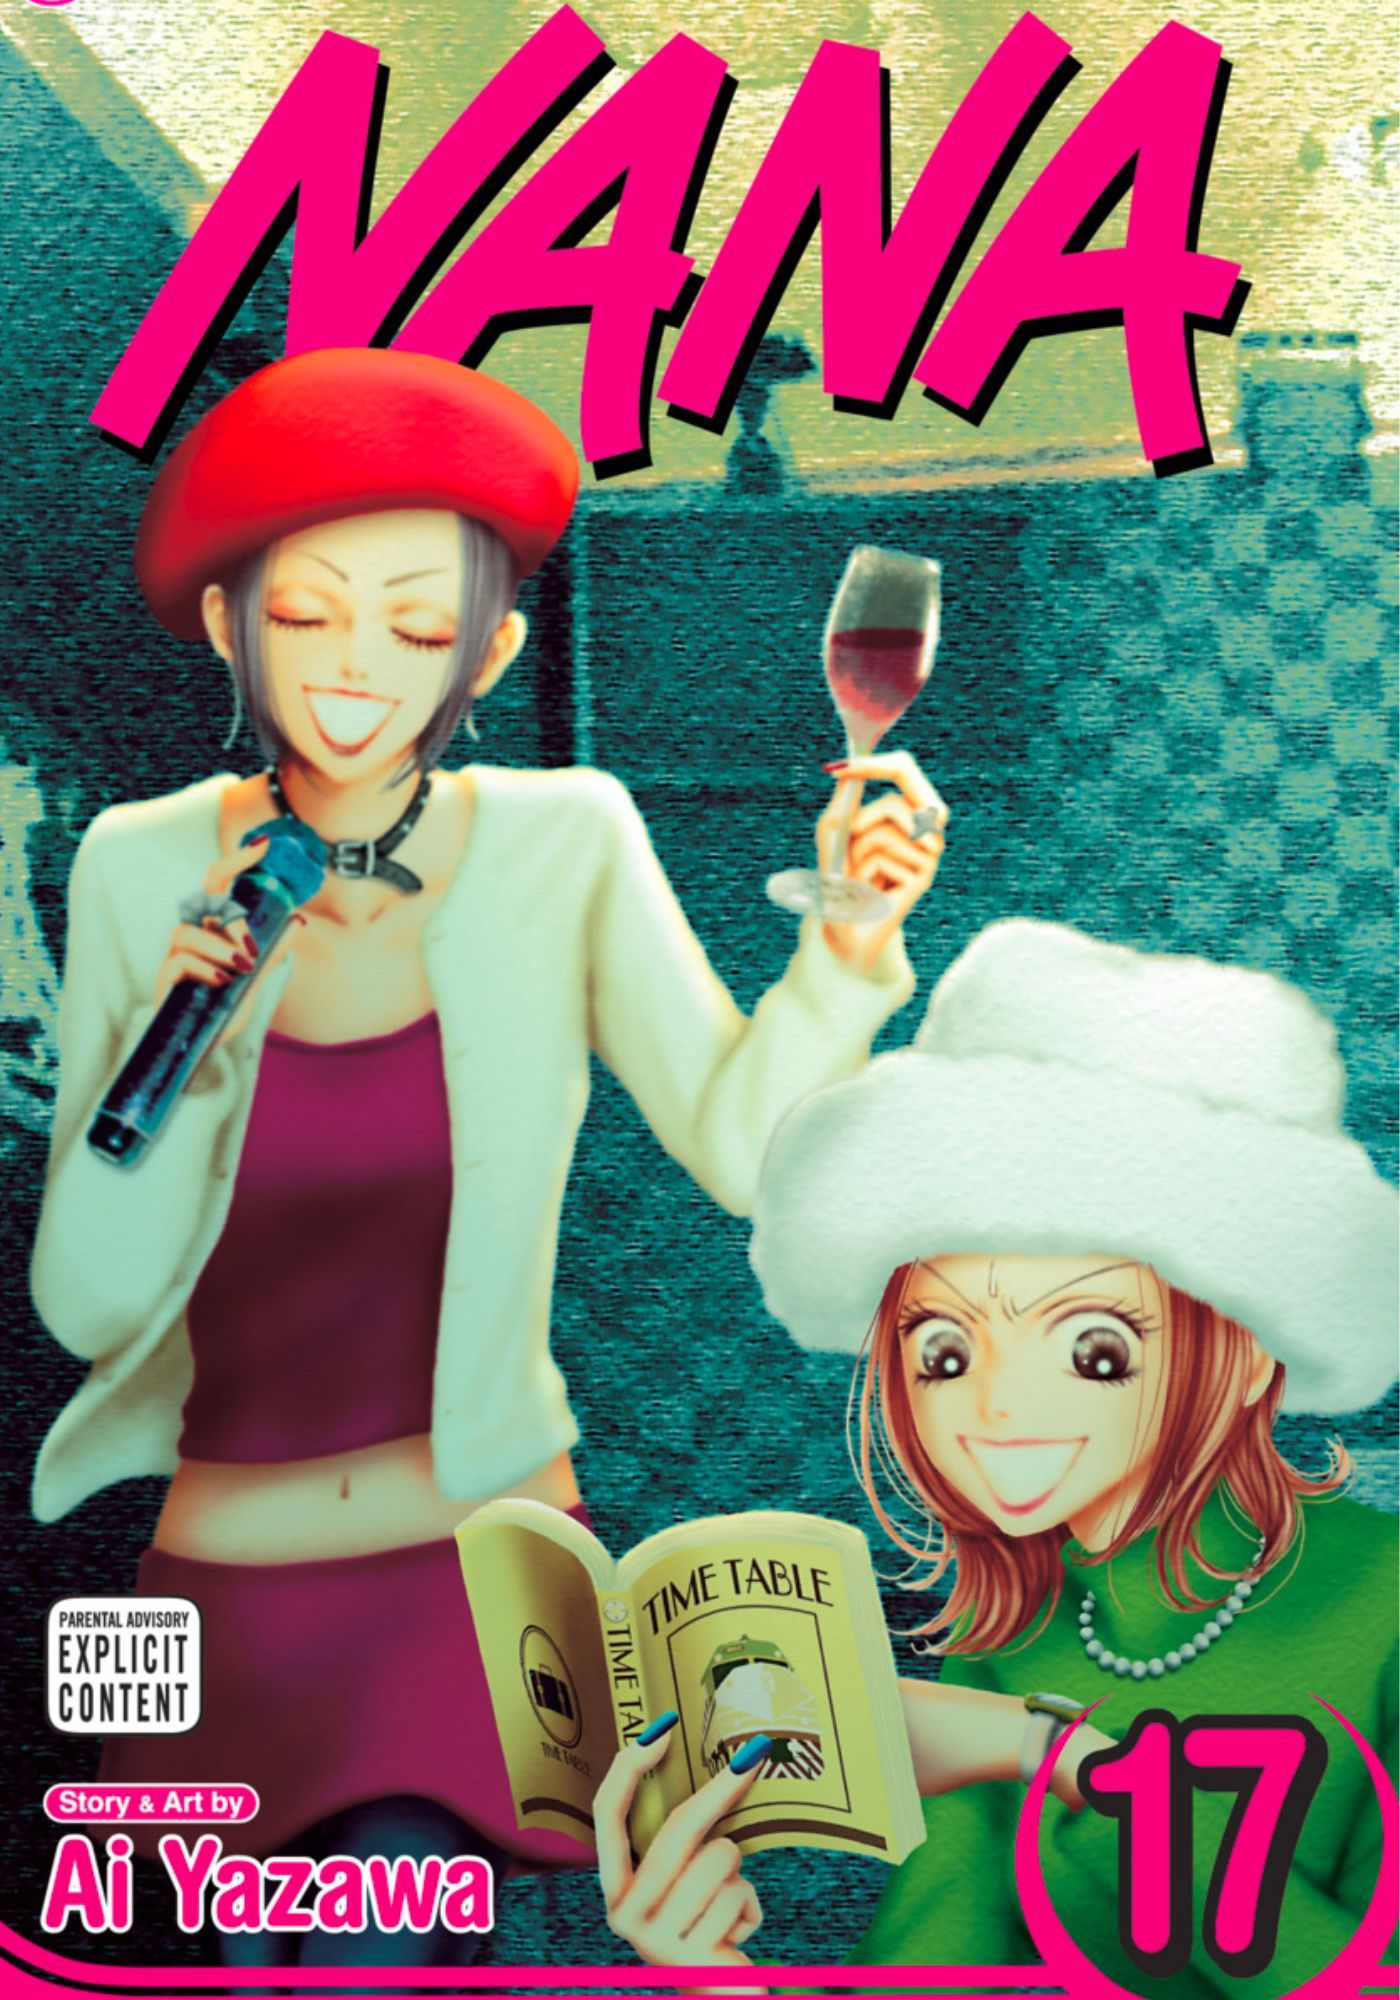 NANA volume 17 cover art featuring the two leads at karaoke together, with hachi realizing that they've missed the last train.